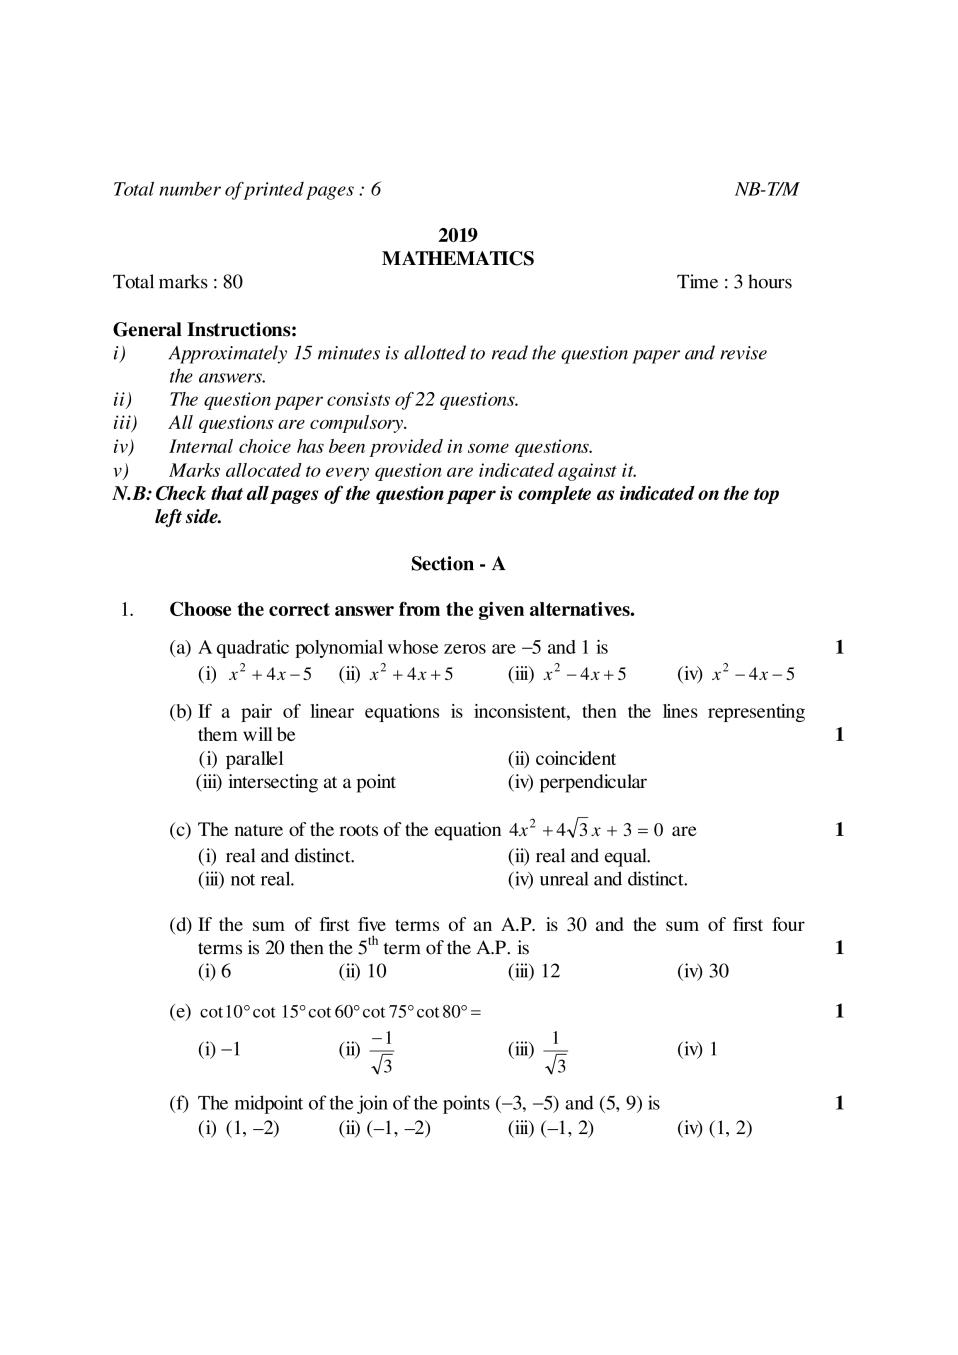 NBSE Class 10 Question Paper 2019 for Maths - Page 1